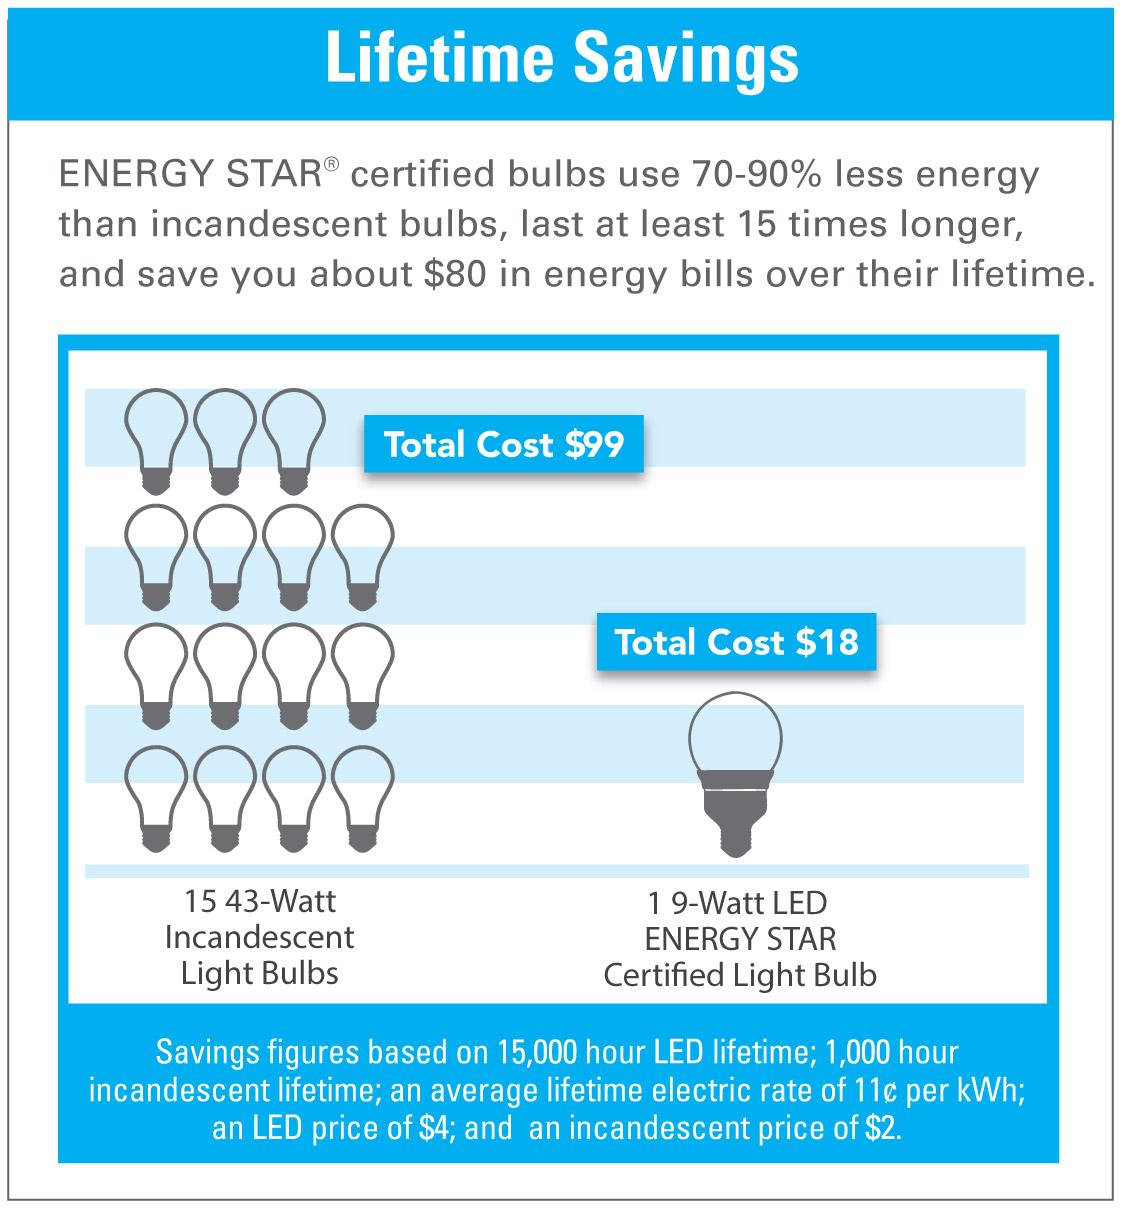 How much electricity does a light bulb use? And how much does it cost?